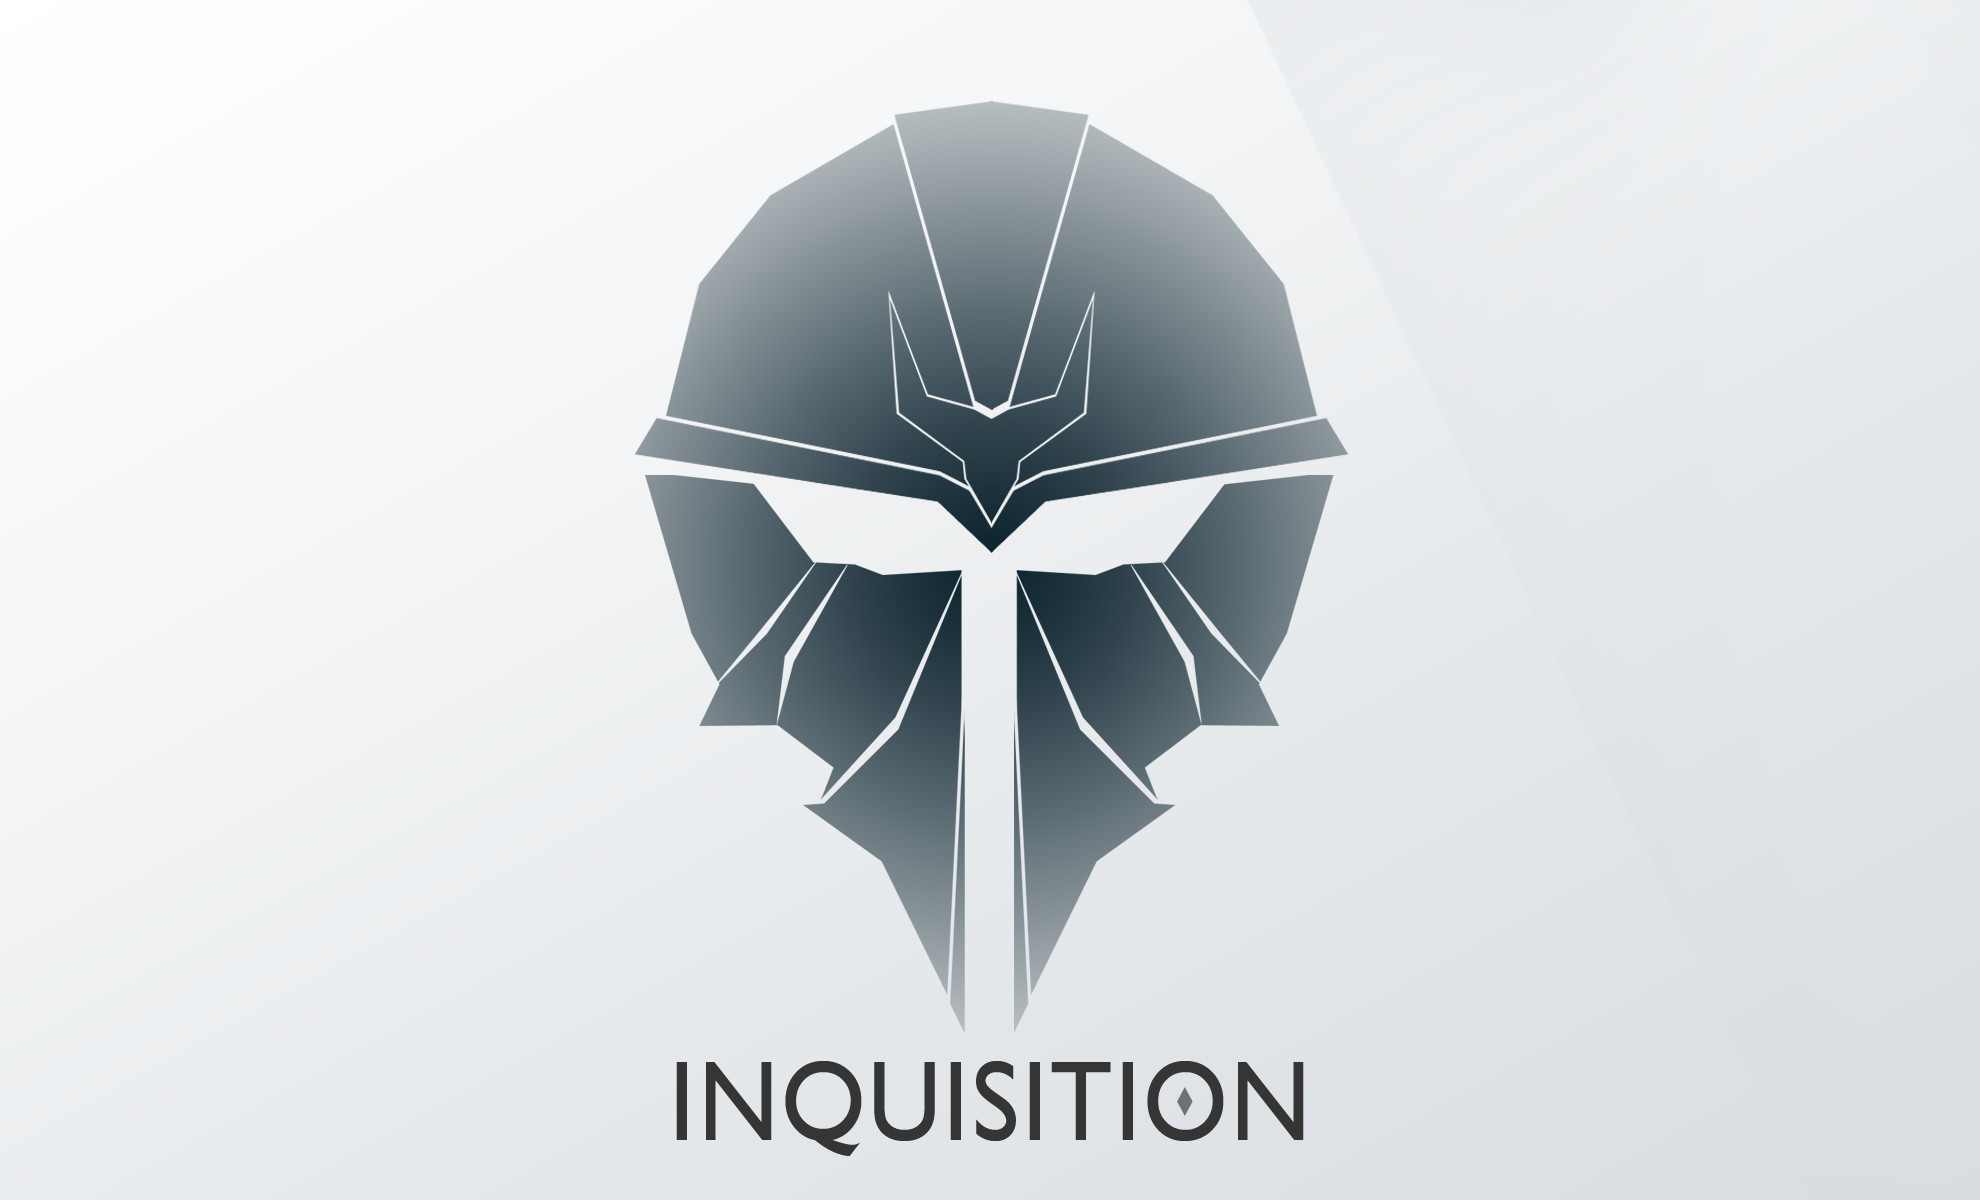 1980x1200 Dragon Age Inquisition Faction Wallpaper by Pateytos Dragon Age Inquisition  Faction Wallpaper by Pateytos